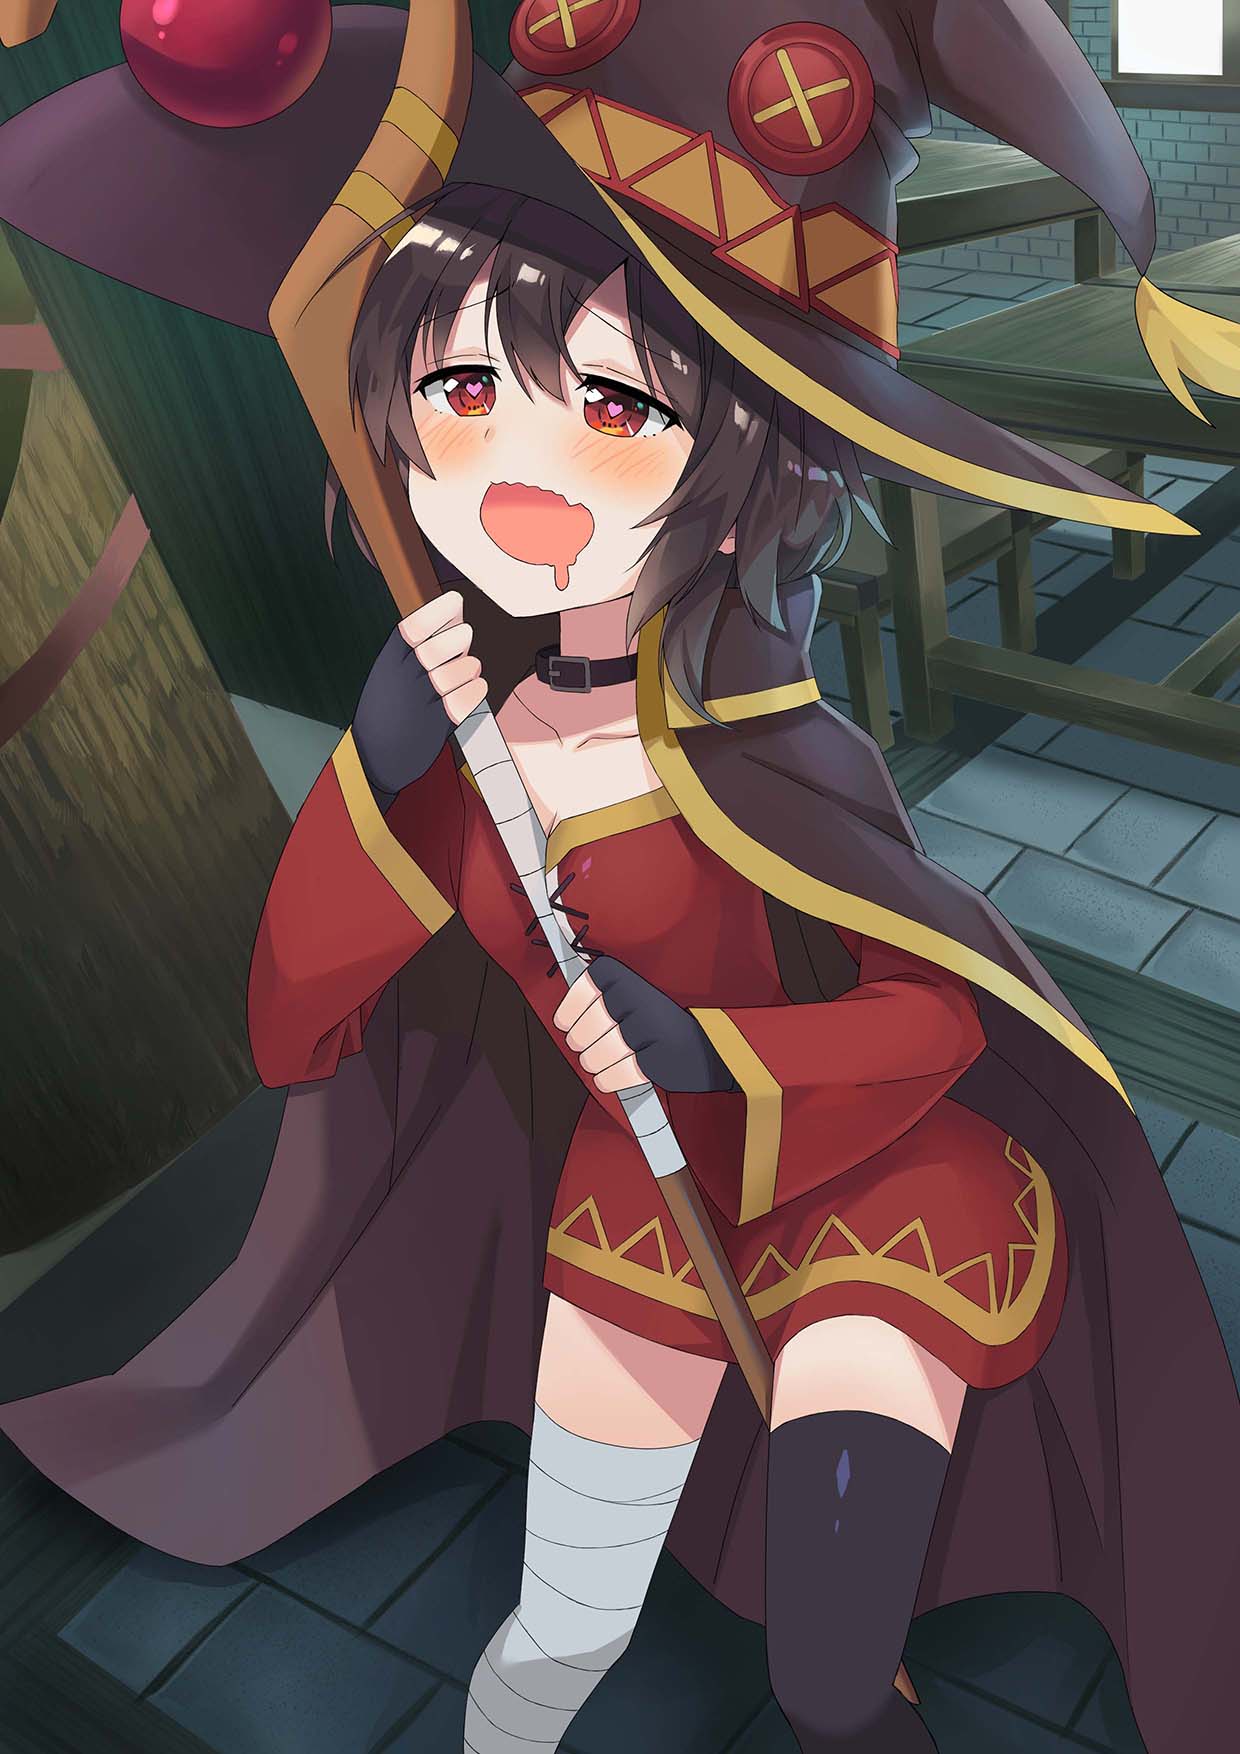 Who's the best girl from Konosuba and why.